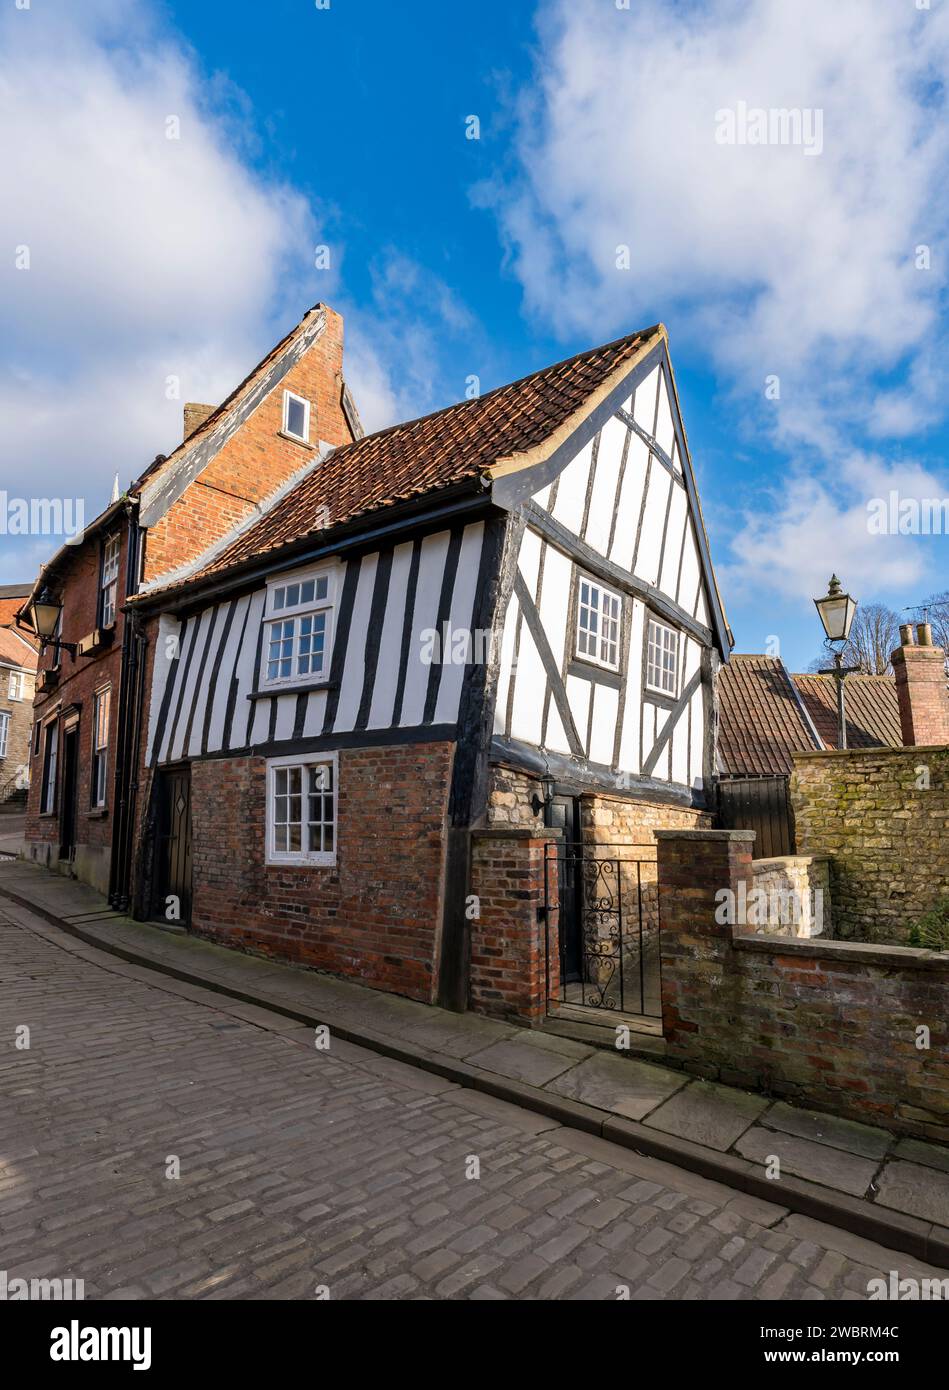 The Crooked house, Michaelgate, Lincoln City, Lincolnshire, England, UK Stock Photo